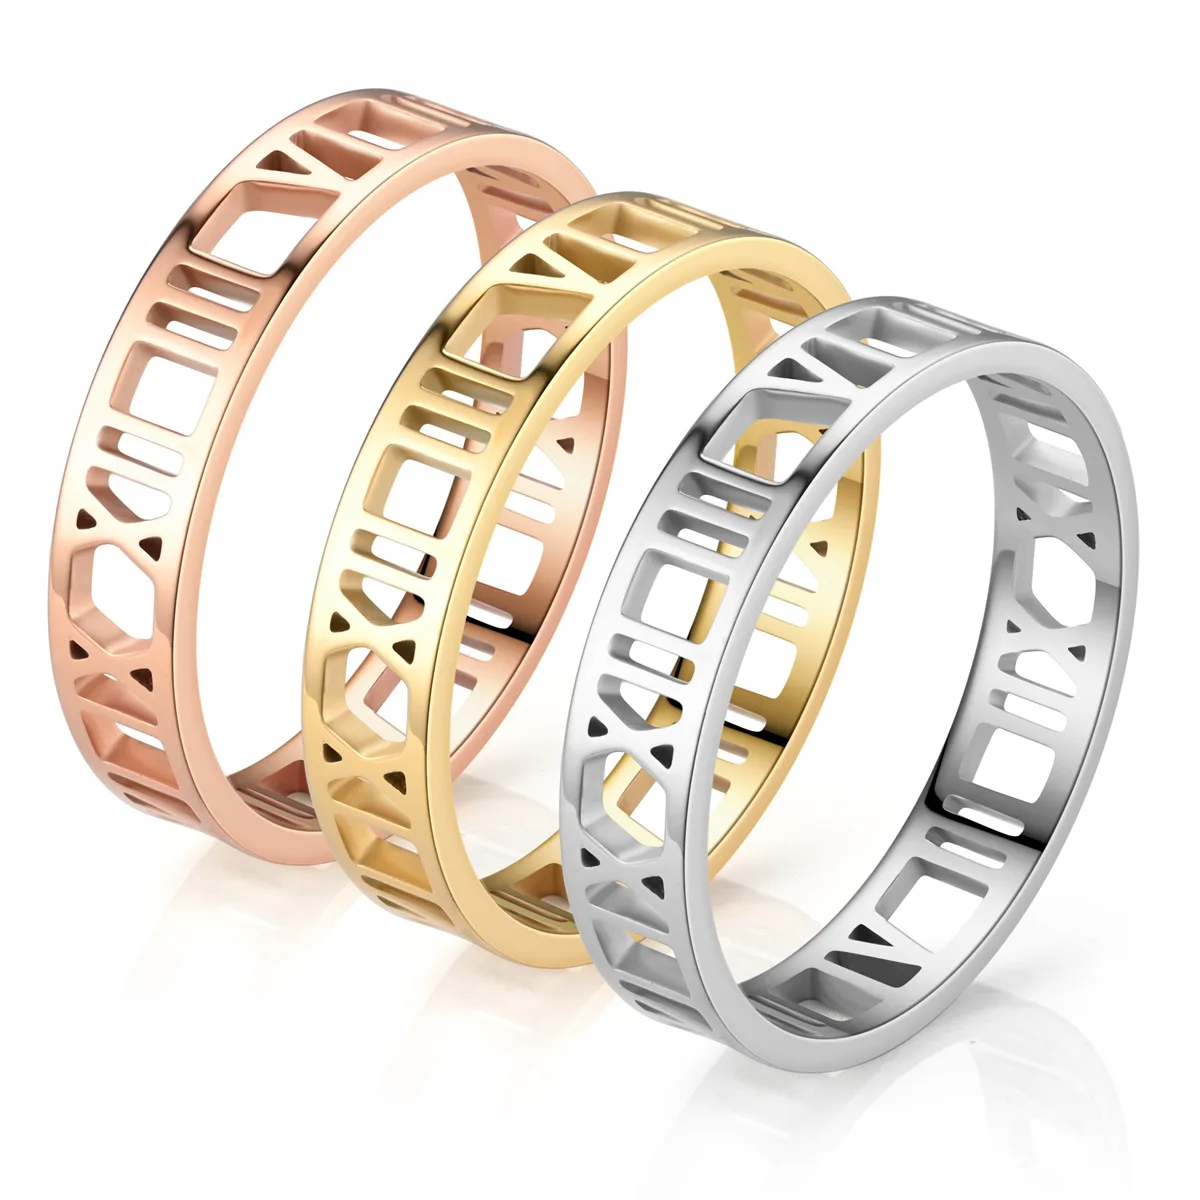 

Luxury 316L Stainless Steel Jewelry Rose Gold Silver Roman Numerals Designer Band Rings Men Gold